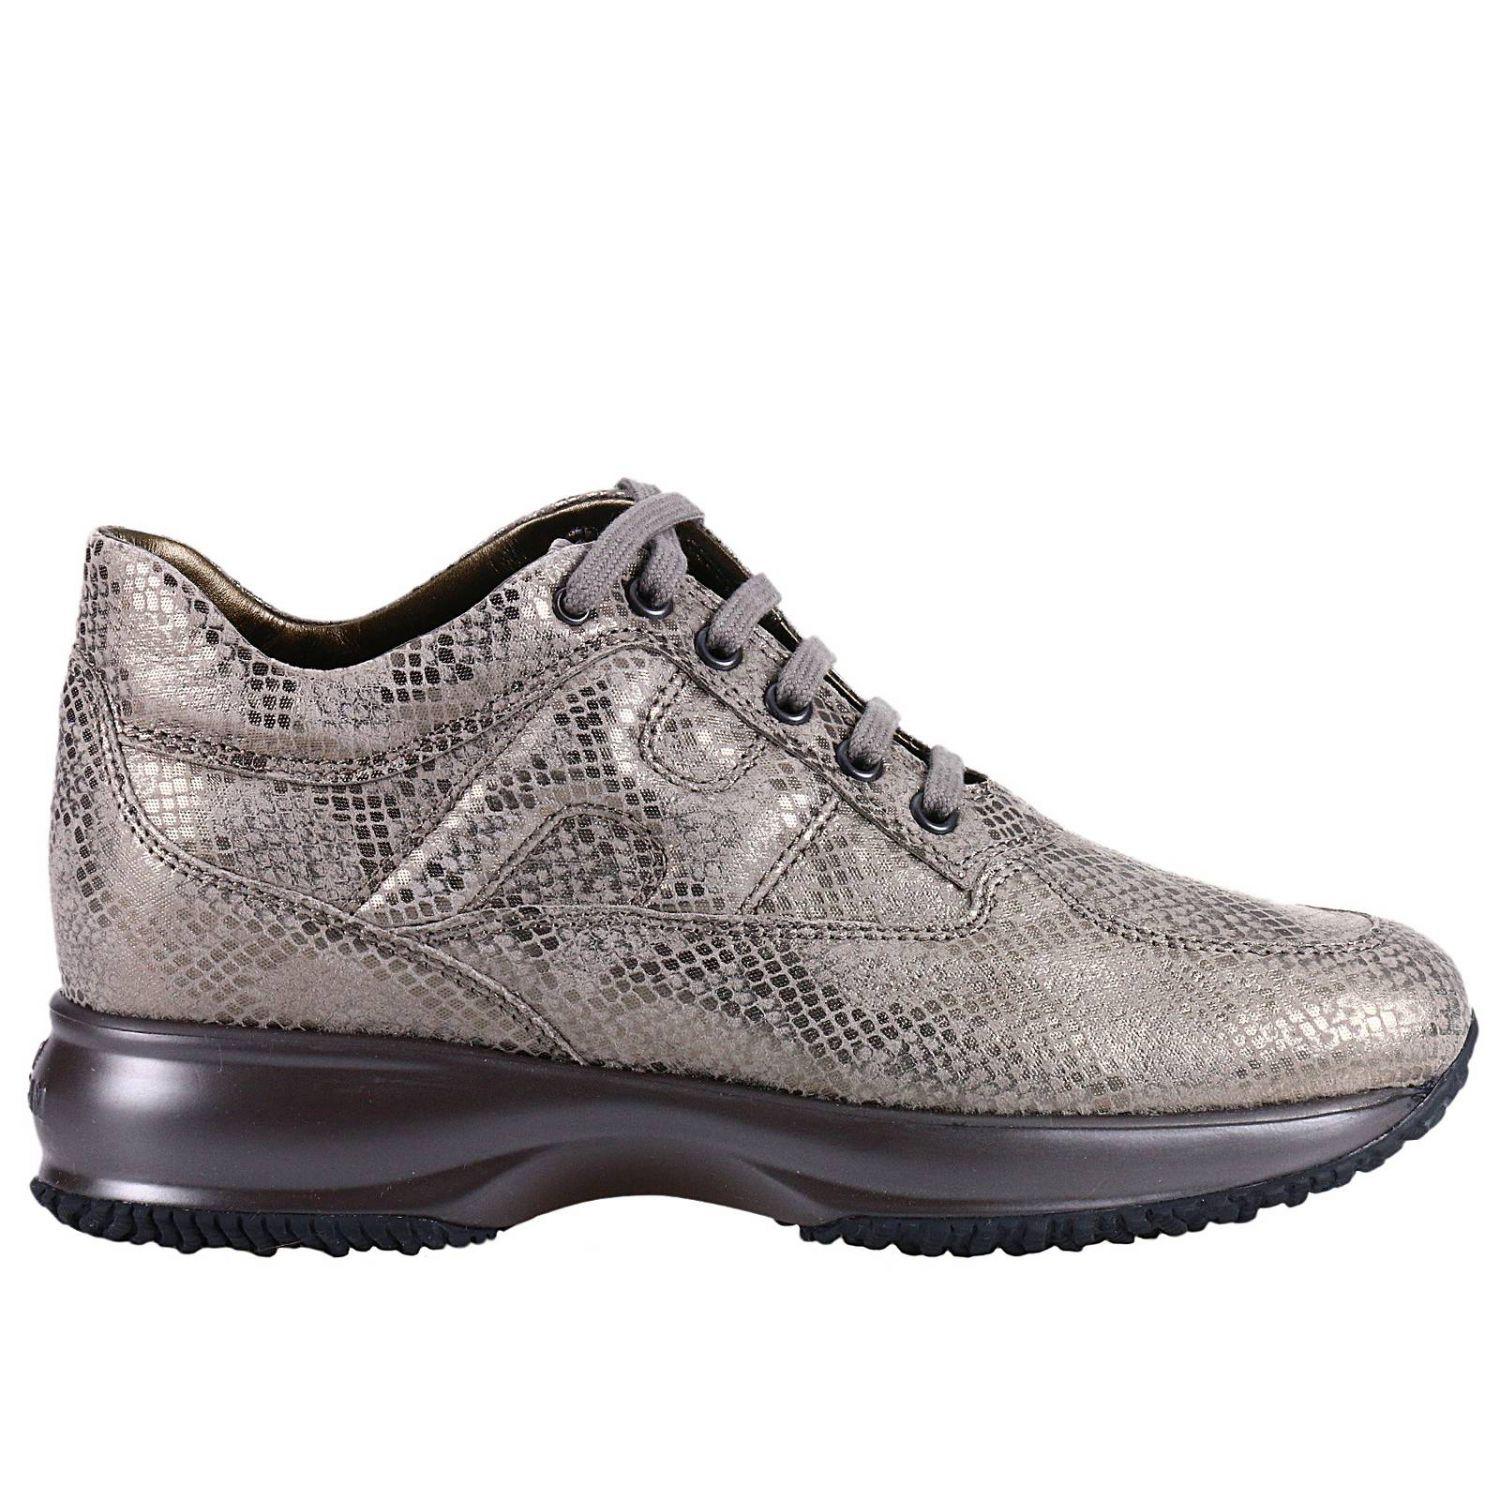 Lyst - Hogan Shoes Women in Natural